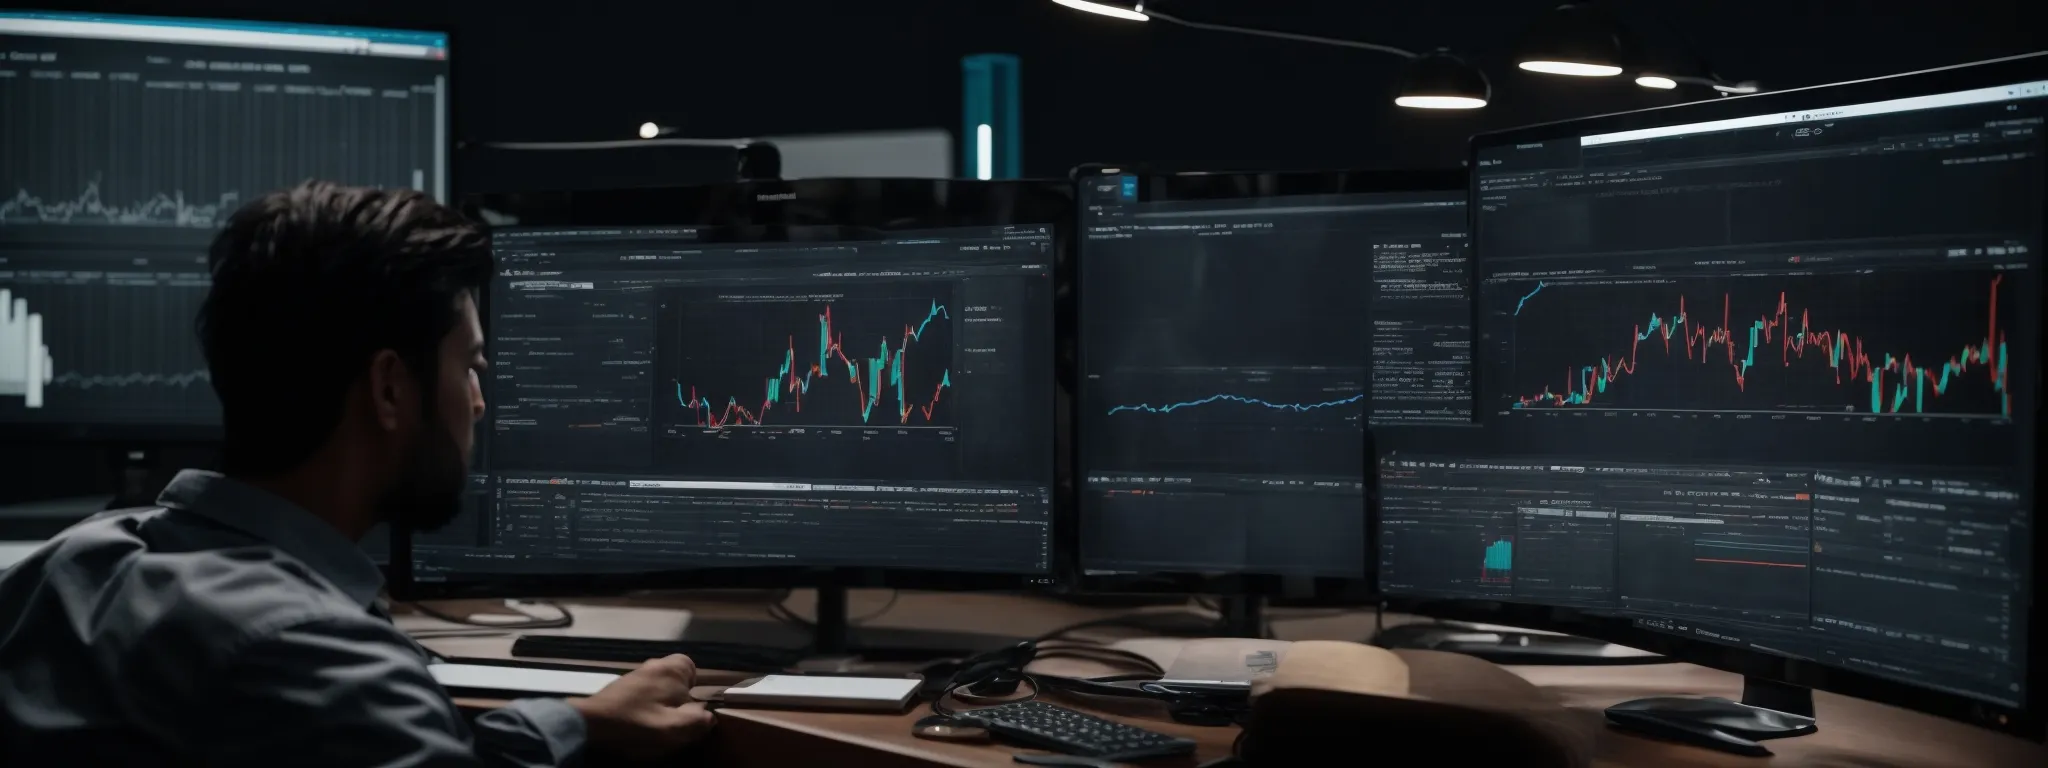 a computer screen displays graphs and keyword analysis charts while an seo professional reviews the integrated data.